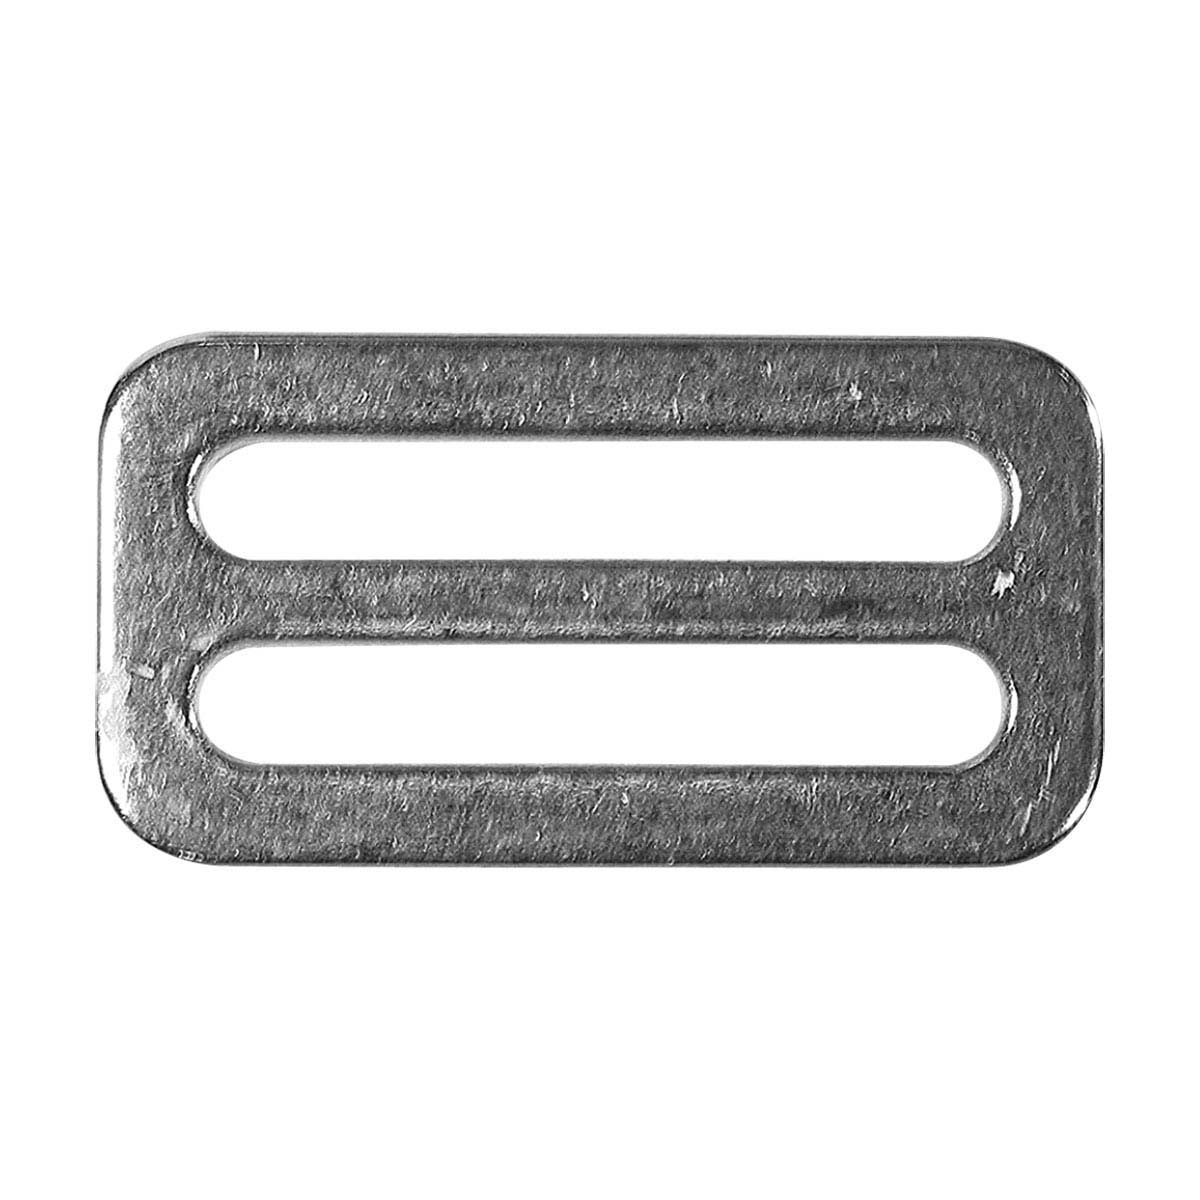 BLA 316 Stainless Steel Buckle 50mm X 32mm 50mm x 32mm